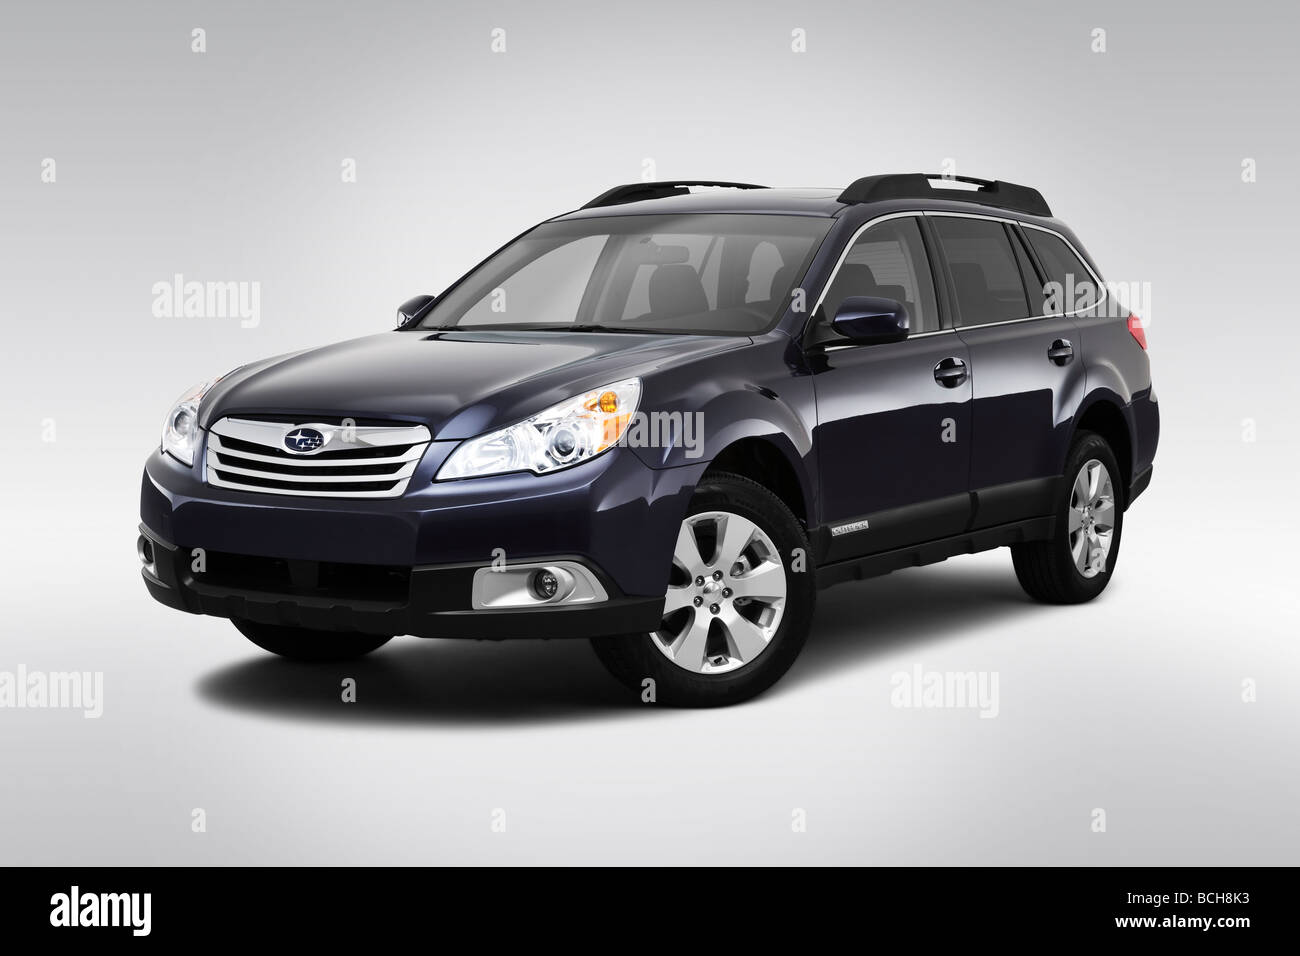 2010 Subaru Outback 2.5i Premium in Gray - Front angle view Stock Photo -  Alamy